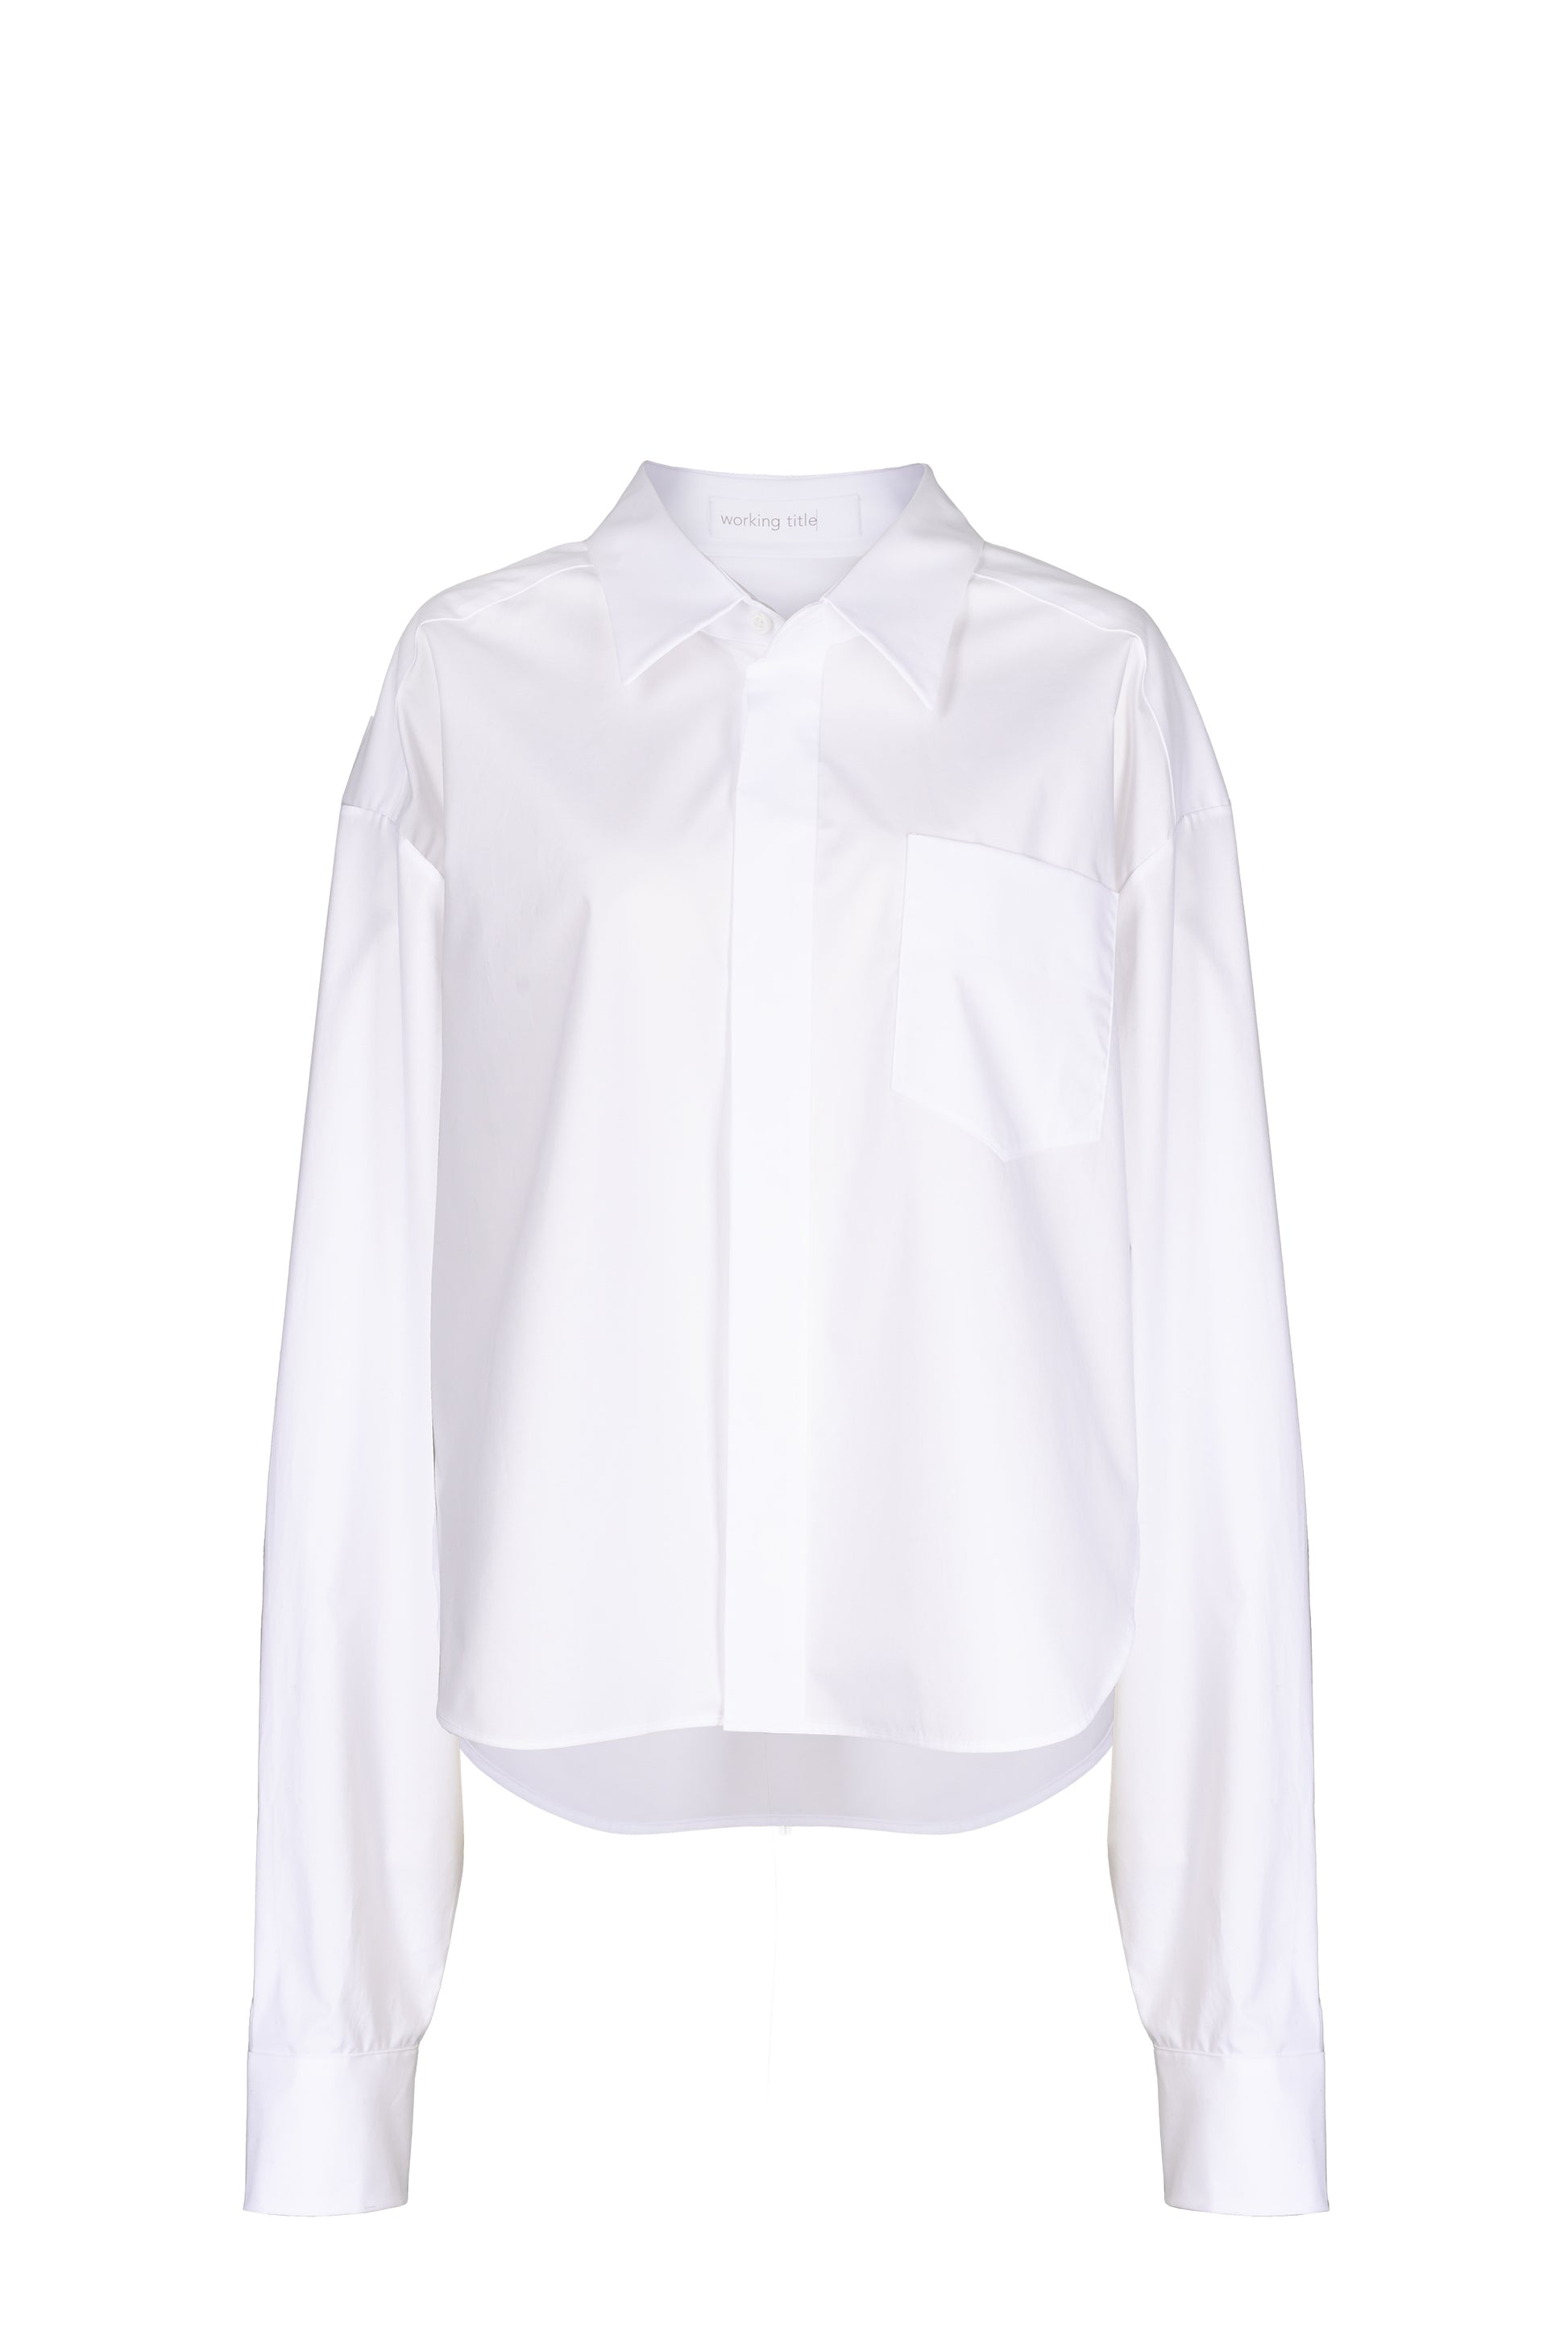 Modern white oversized shirt with a sharp collar and chest pocket, offering a sleek and versatile addition to a chic wardrobe.